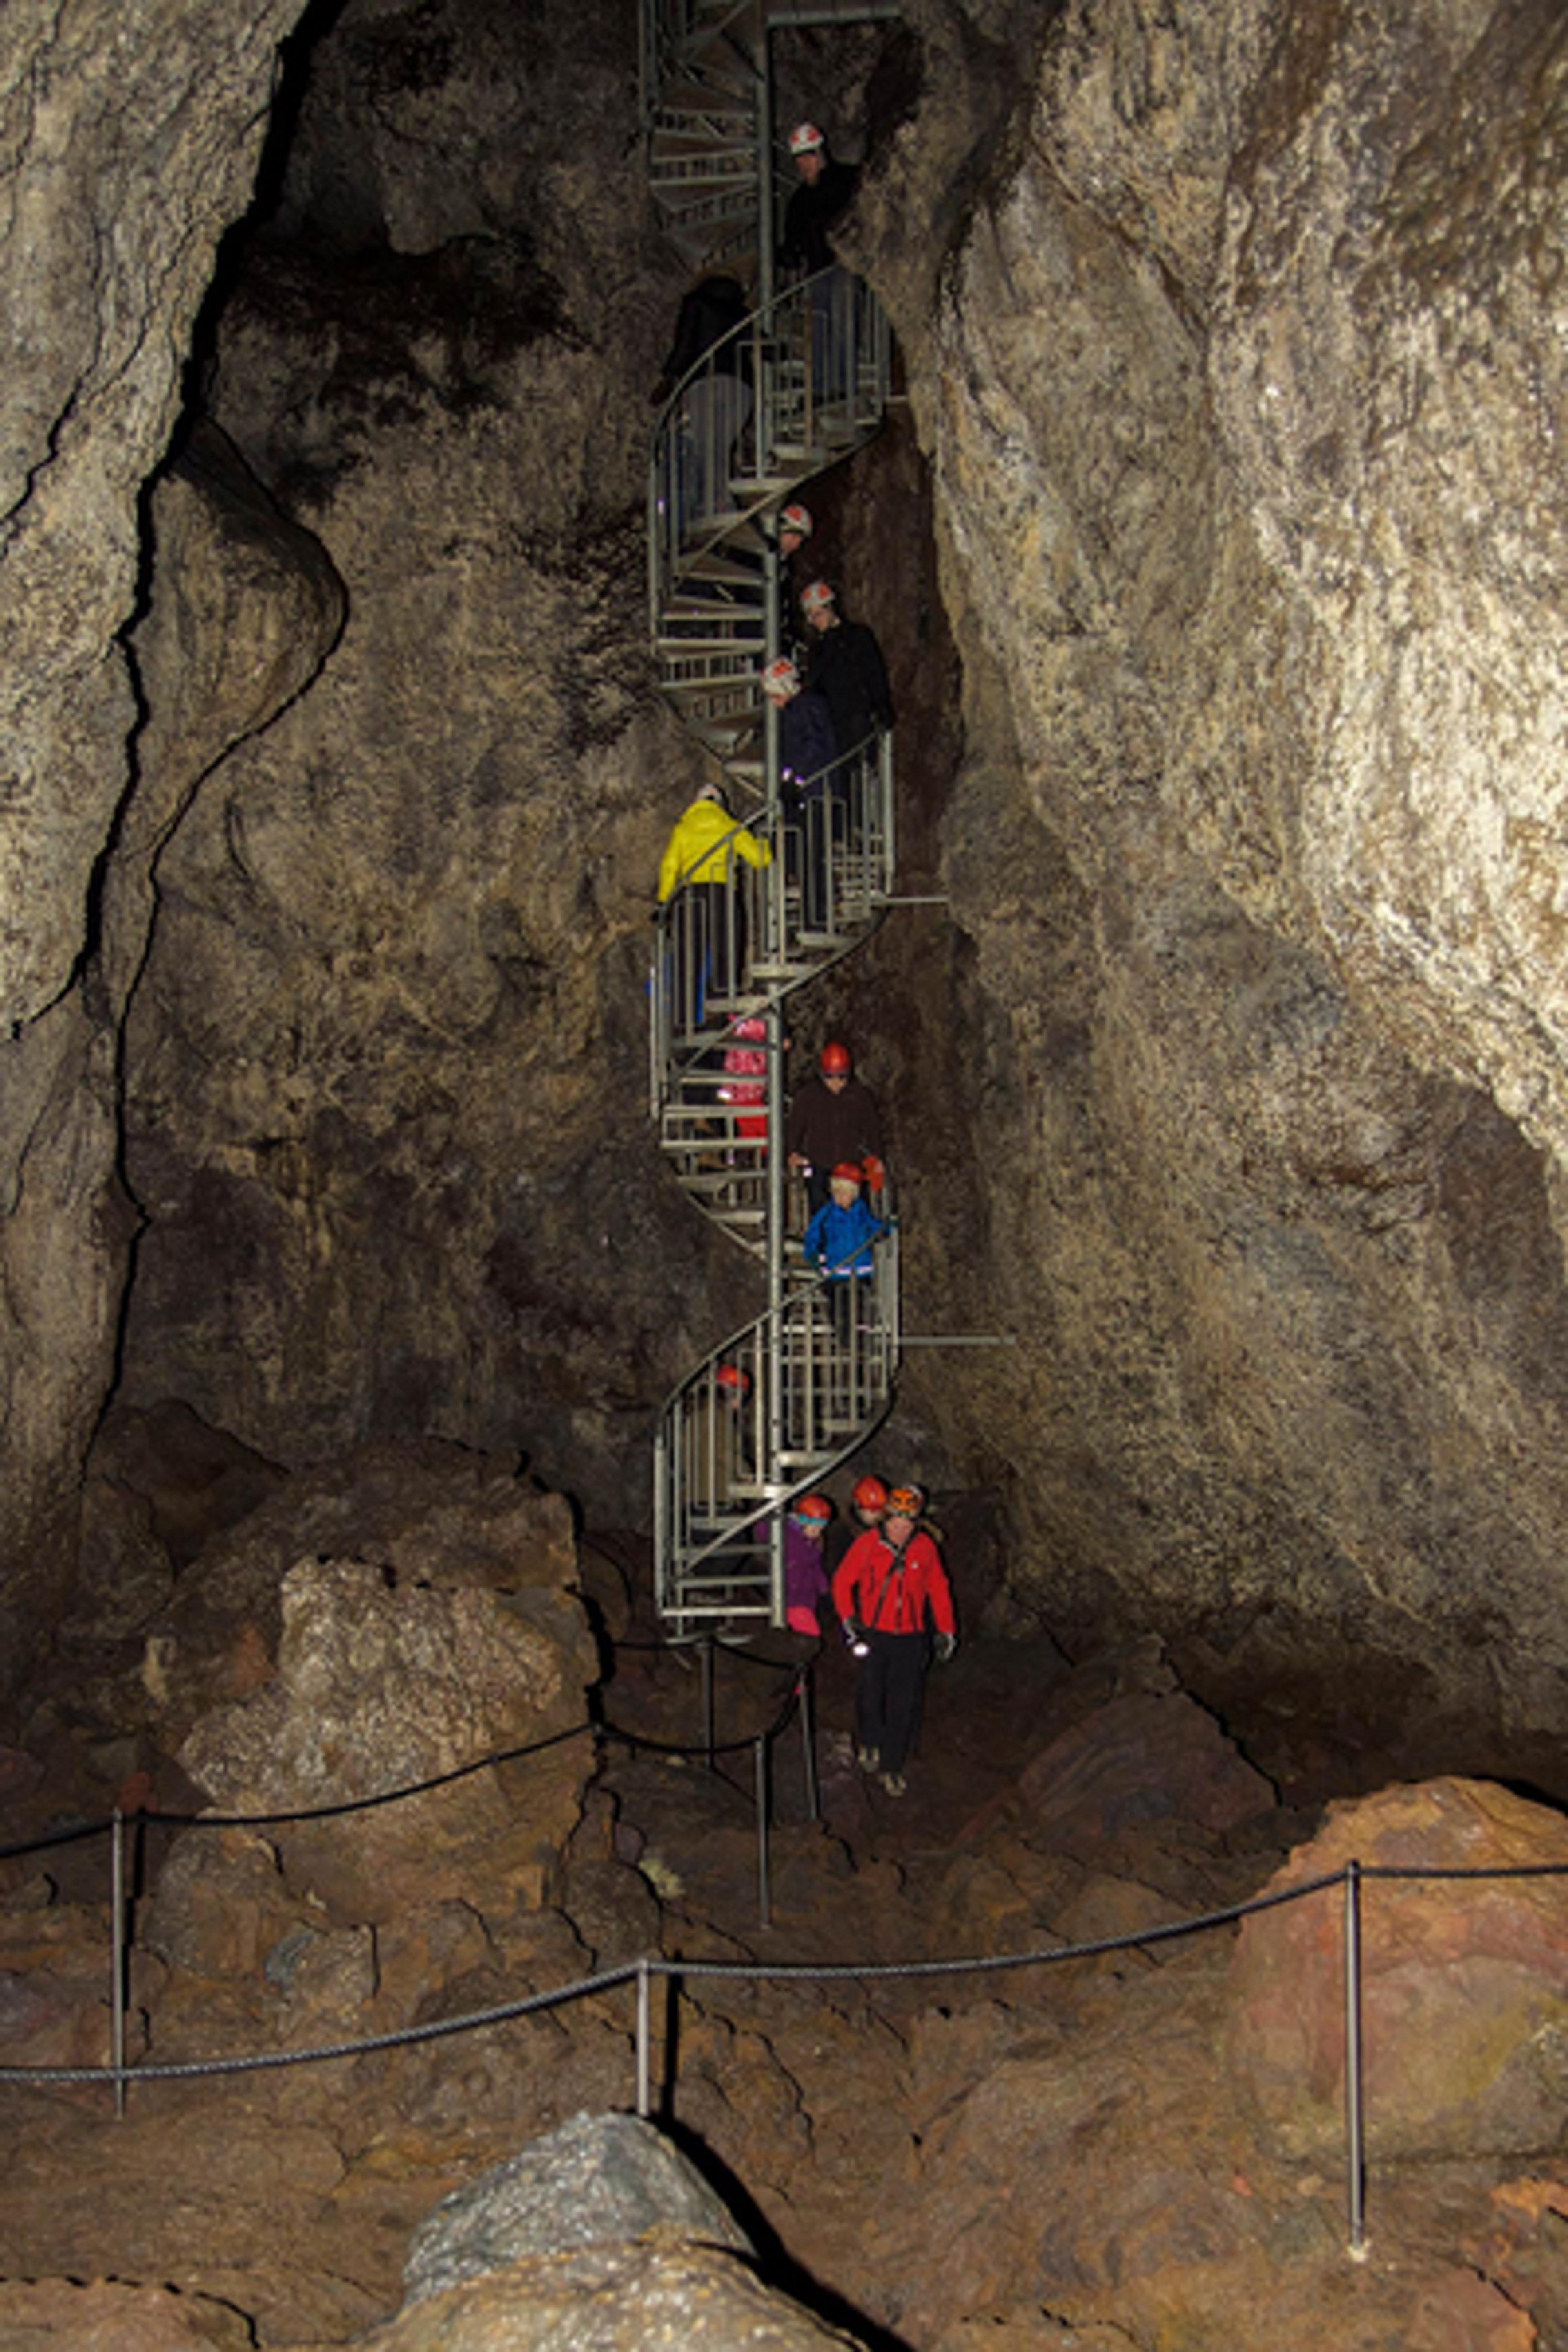 Tourists descend a steep metal staircase into the depths of a dark cave, exploring its rugged interior illuminated by sparse lighting.